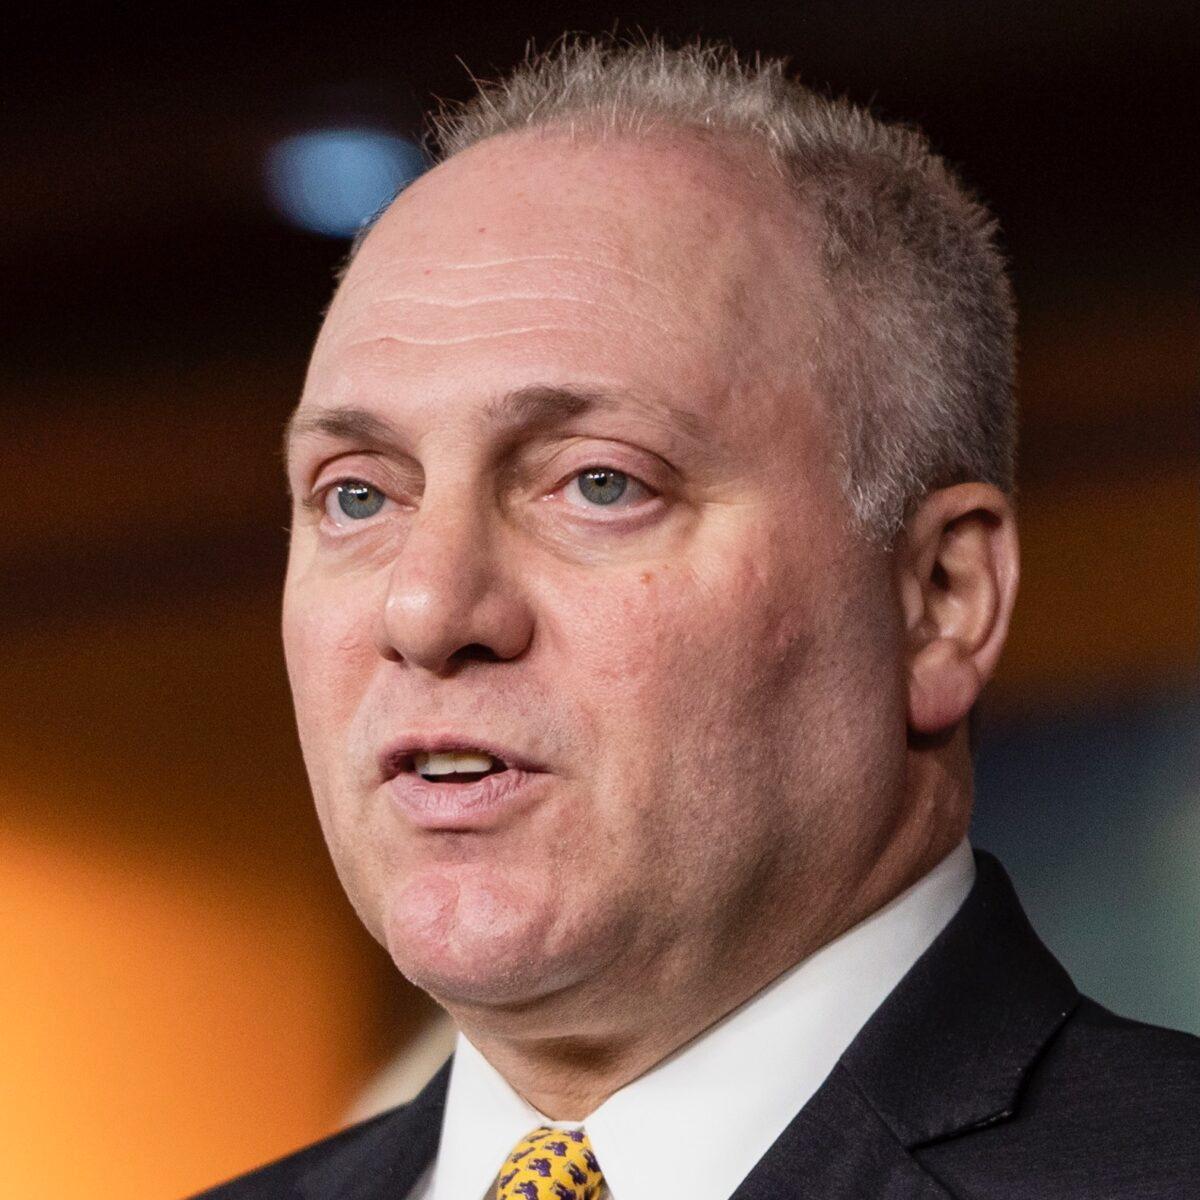 Republican Whip Rep. Steve Scalise (R-La.) speaks during a press conference at the US Capitol on in Washington on Dec. 17, 2019. (Samuel Corum/Getty Images)